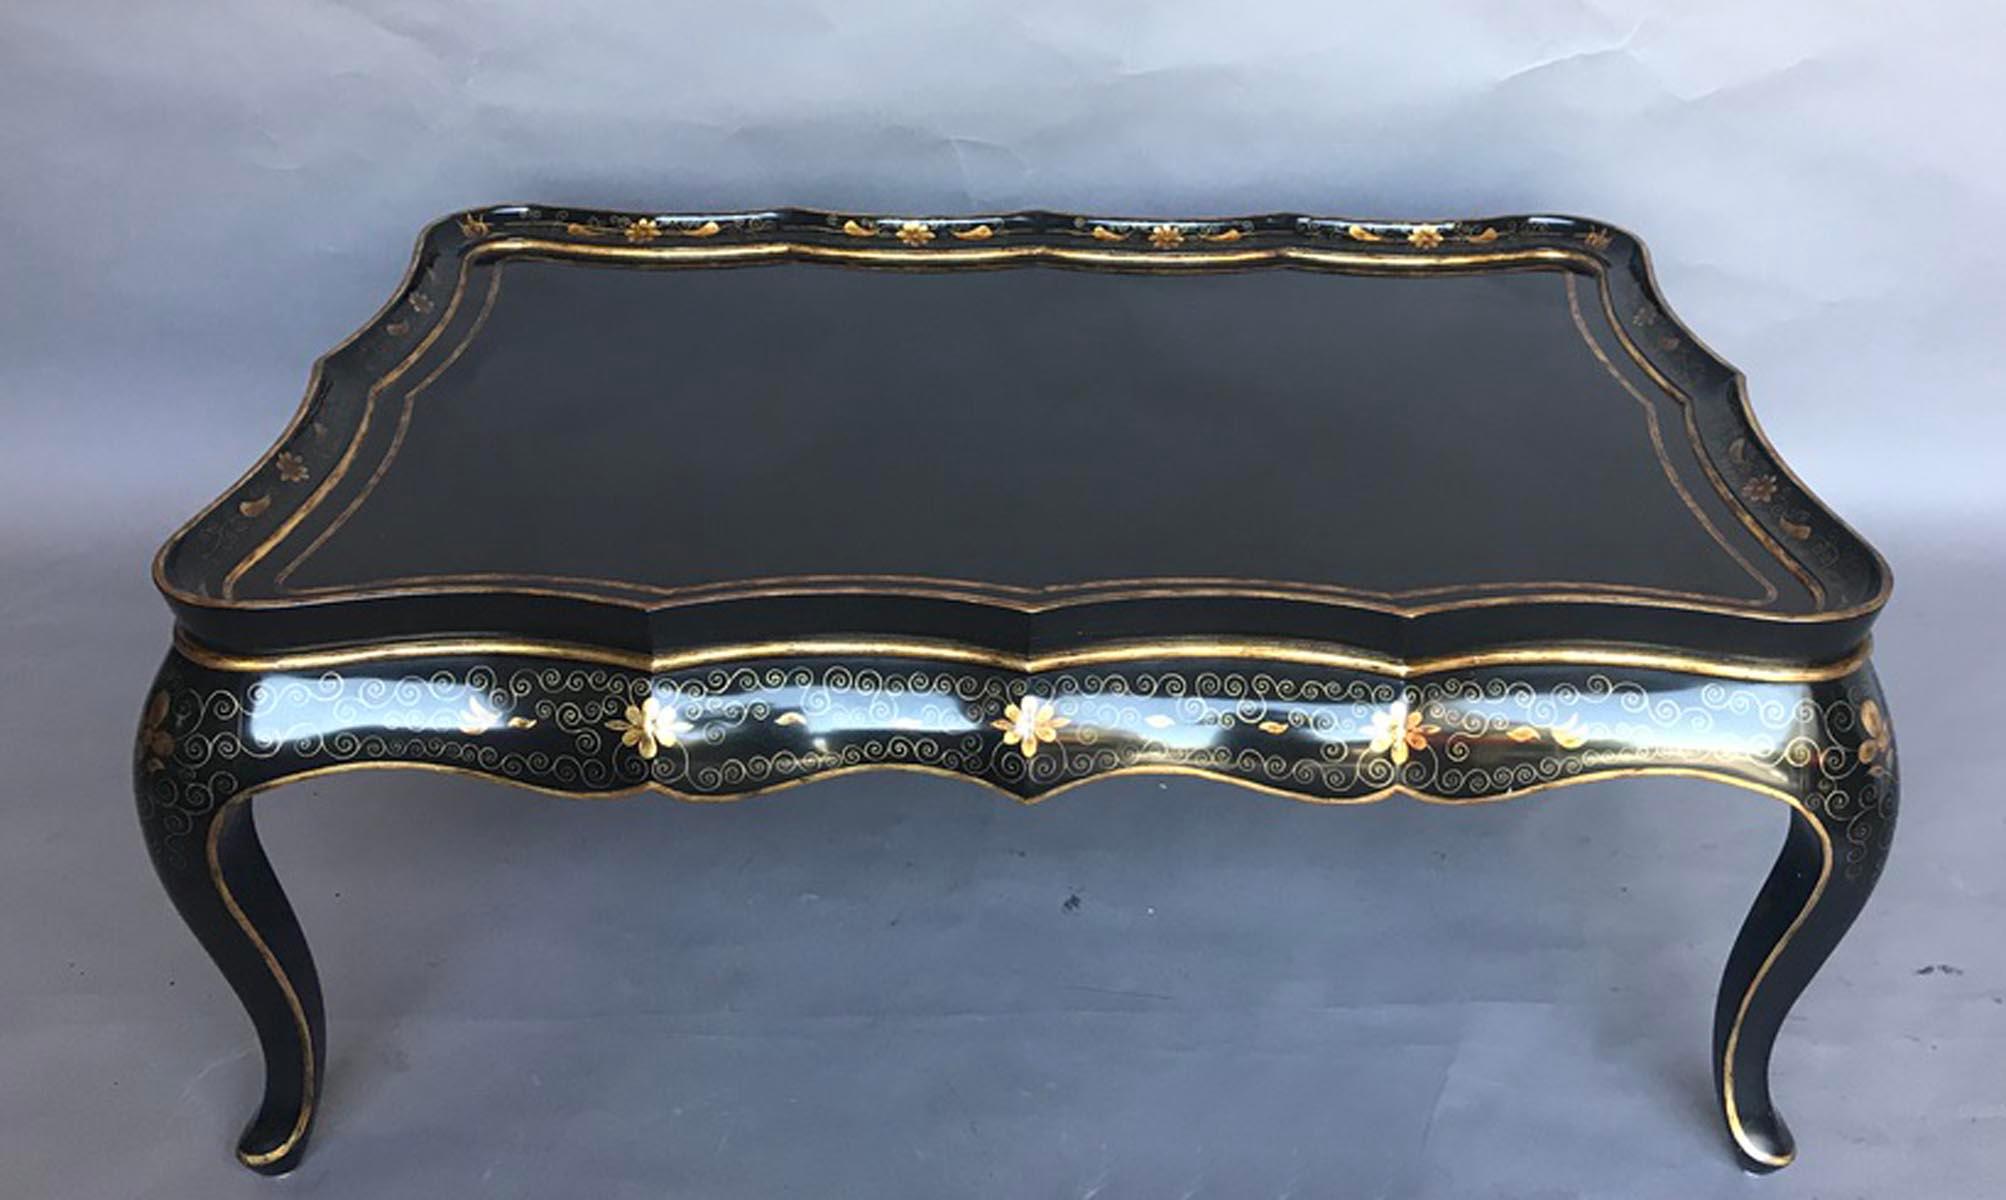 Painted Gilt Decorated Coffee Table